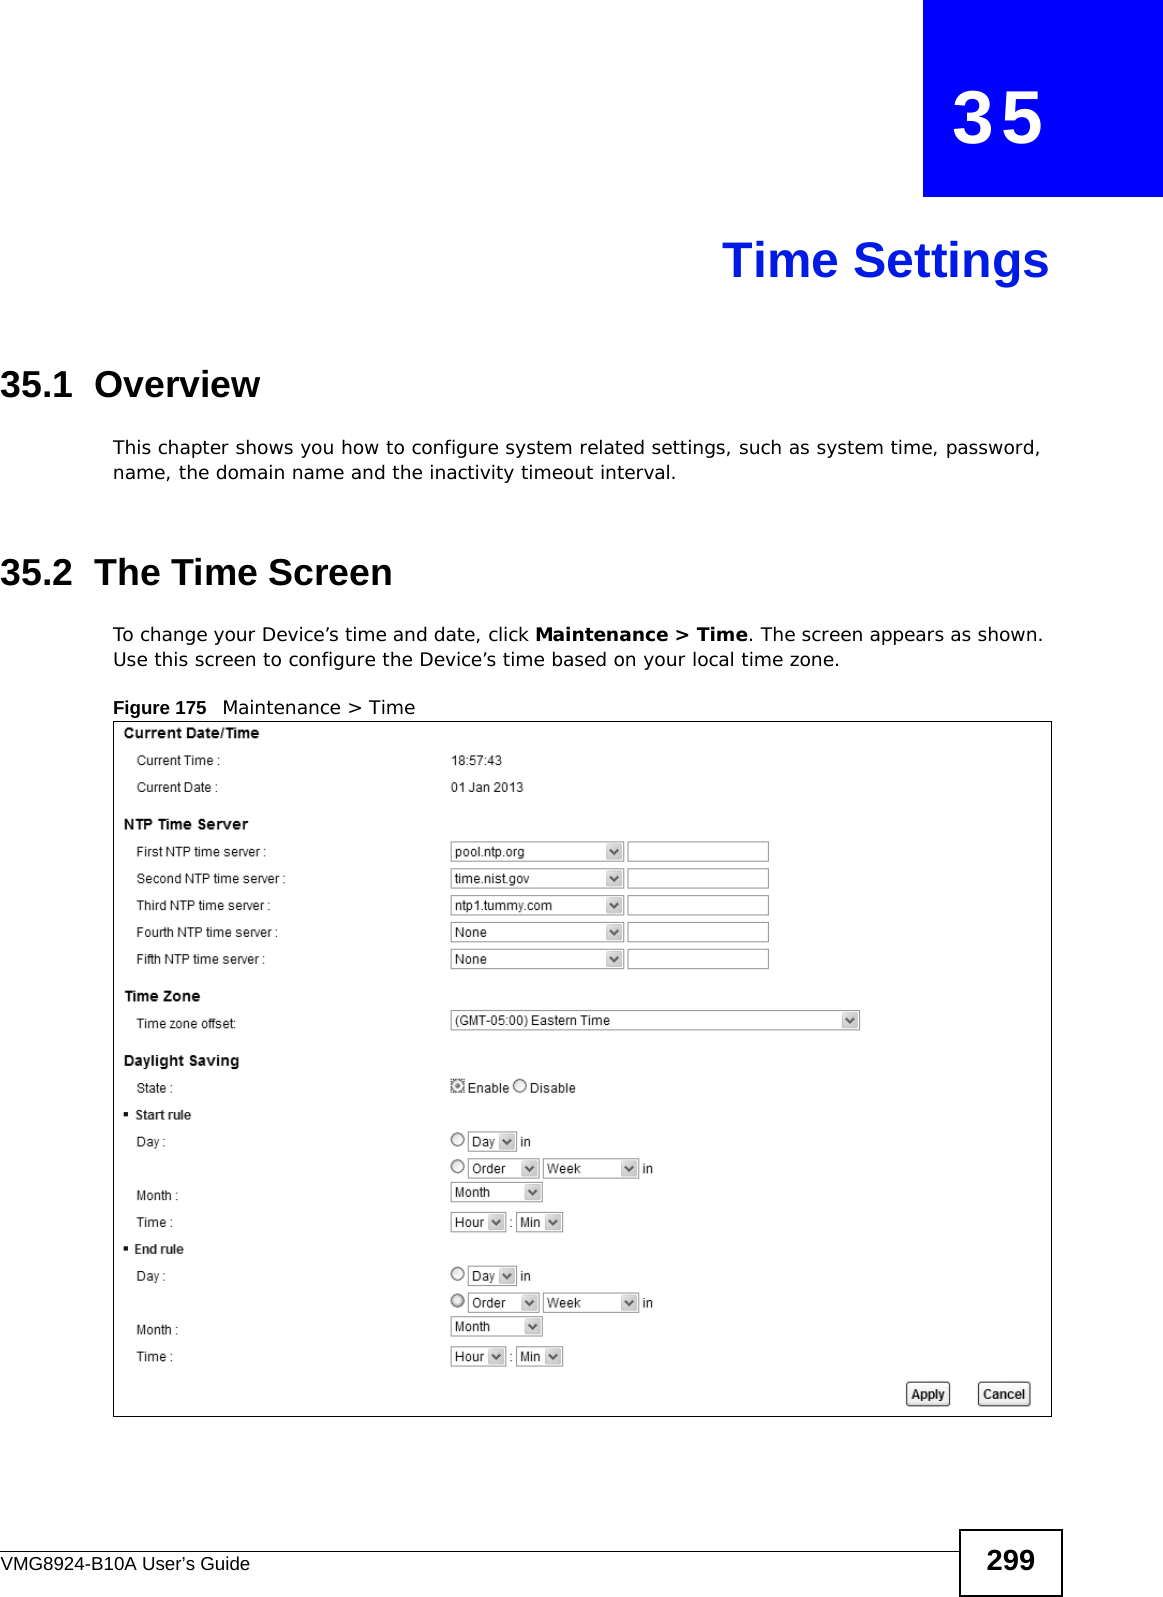 VMG8924-B10A User’s Guide 299CHAPTER   35Time Settings35.1  OverviewThis chapter shows you how to configure system related settings, such as system time, password, name, the domain name and the inactivity timeout interval.    35.2  The Time Screen To change your Device’s time and date, click Maintenance &gt; Time. The screen appears as shown. Use this screen to configure the Device’s time based on your local time zone.Figure 175   Maintenance &gt; Time